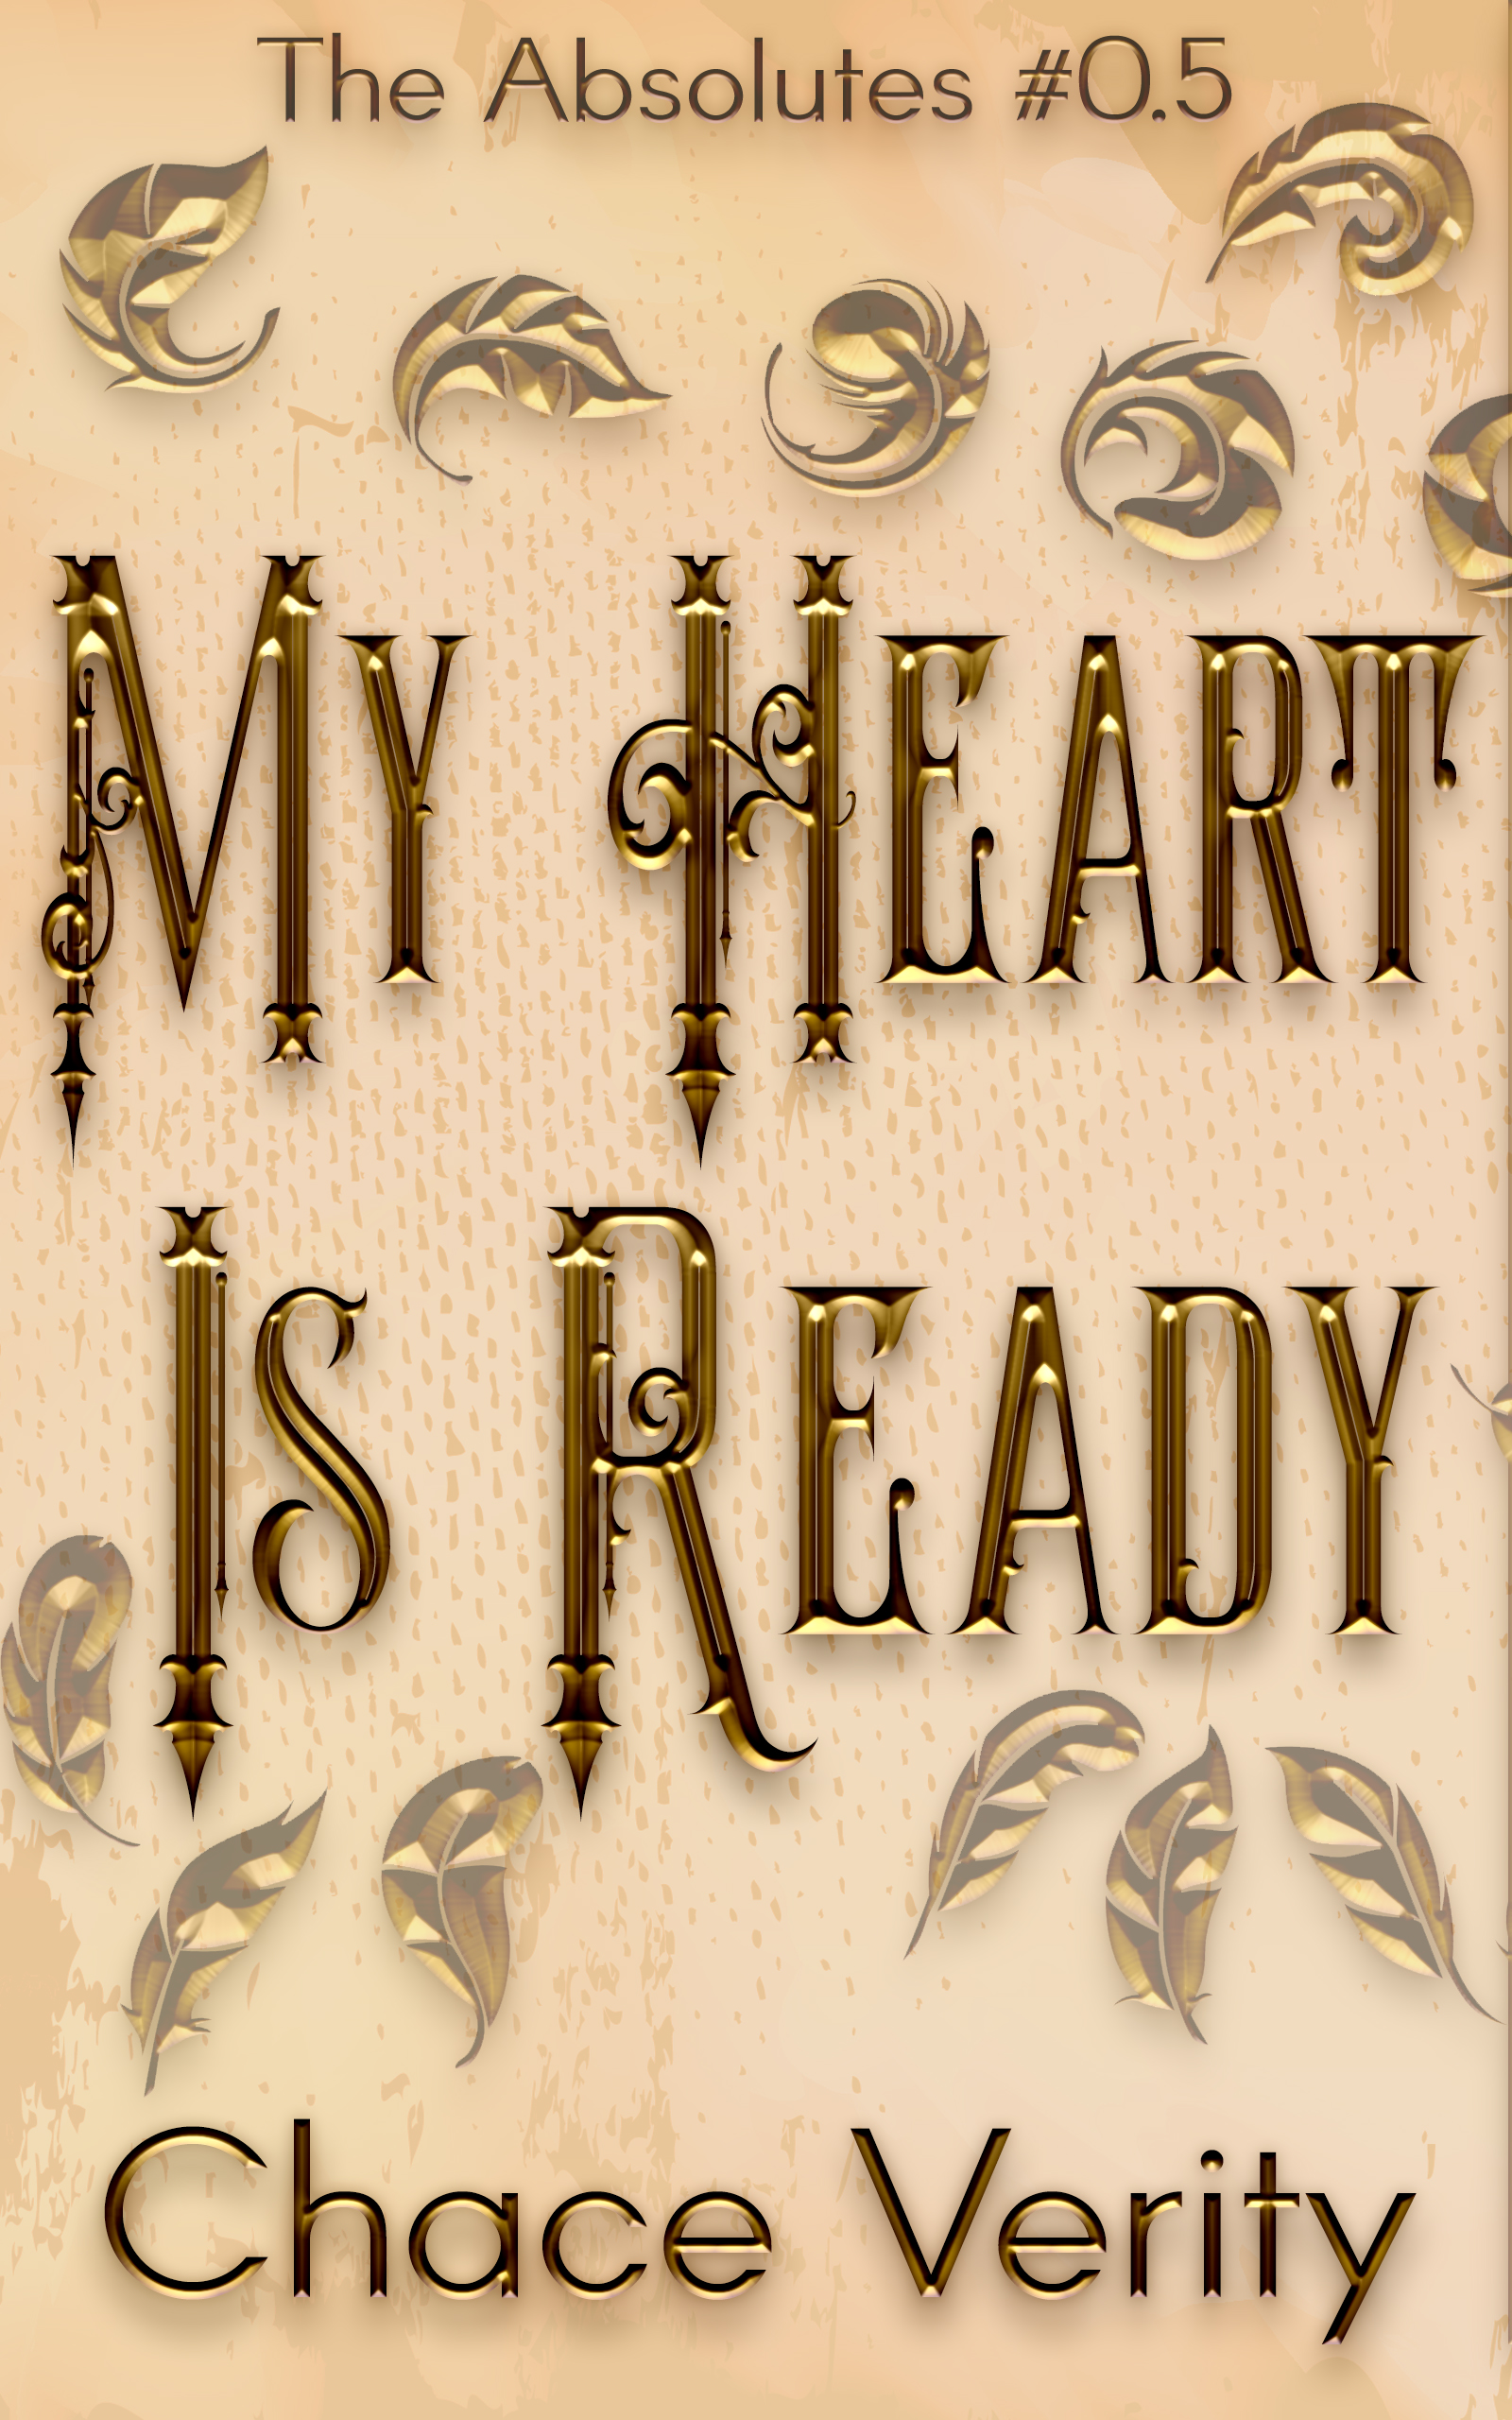 Cover for My Heart Is Ready by Chace Verity featuring the book title in gold text with gold feathers.